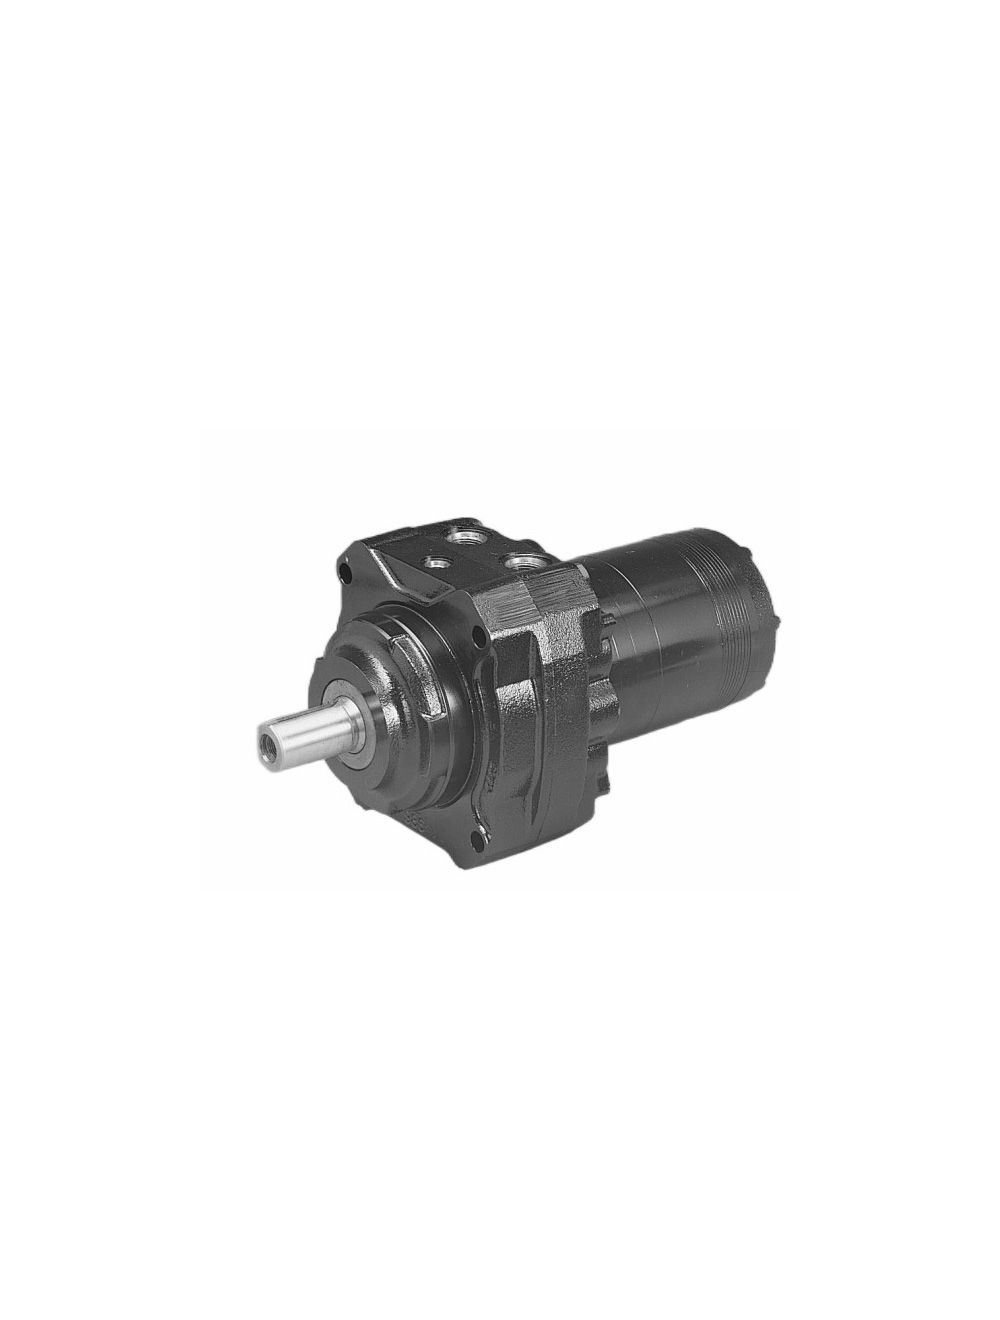 New In stock for sale, PARKER Hydraulic Motor BH-0405